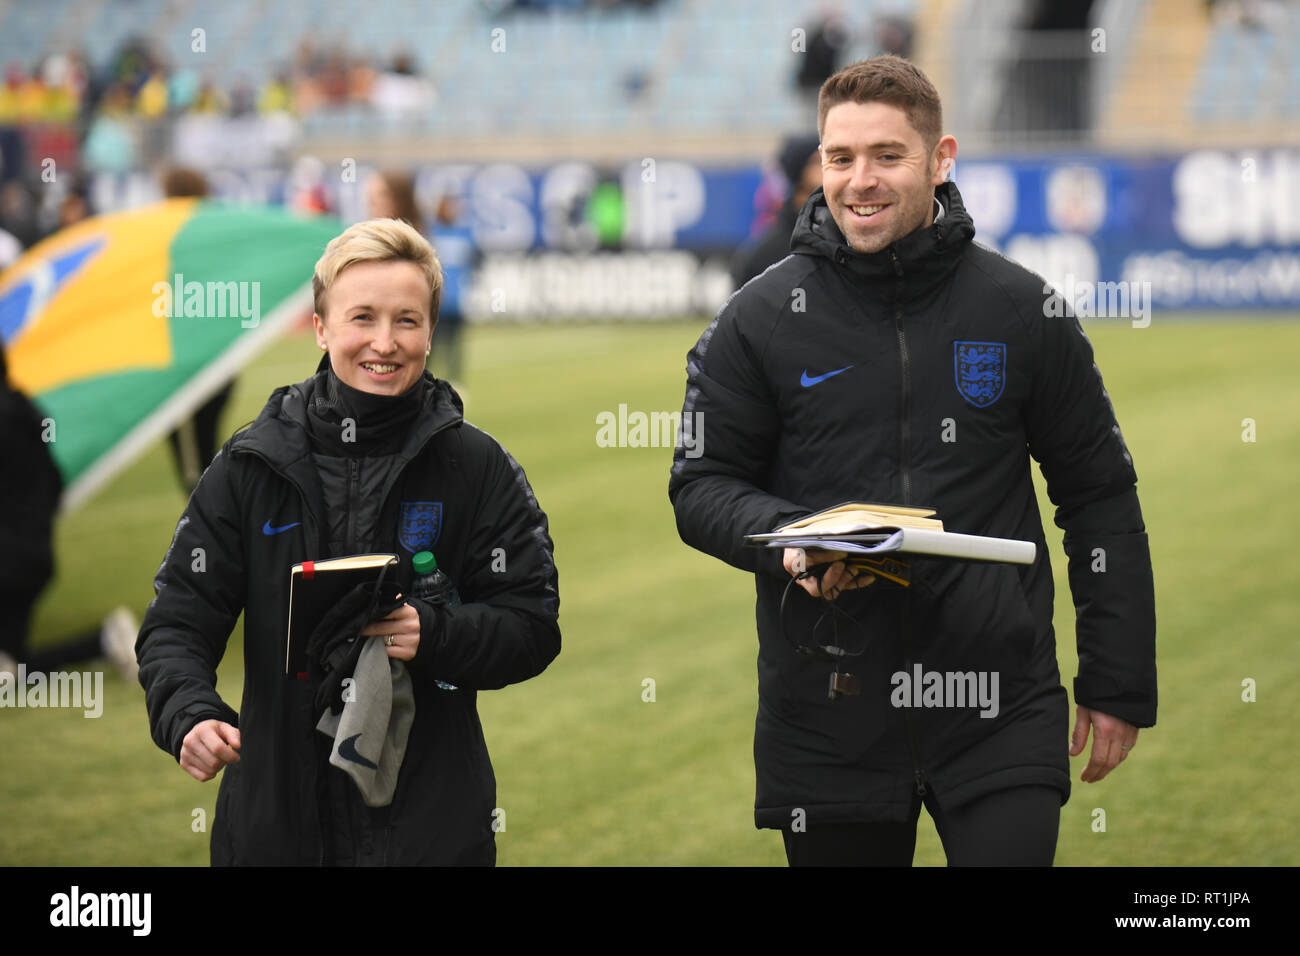 England women's football 2019 world cup friendly - England Women's National team coaches in the SheBelieves Cup featuring the England women's national football team versus the Brazil women's national football team. Professional women footballers on the pitch. Credit: Don Mennig/Alamy Live News Stock Photo